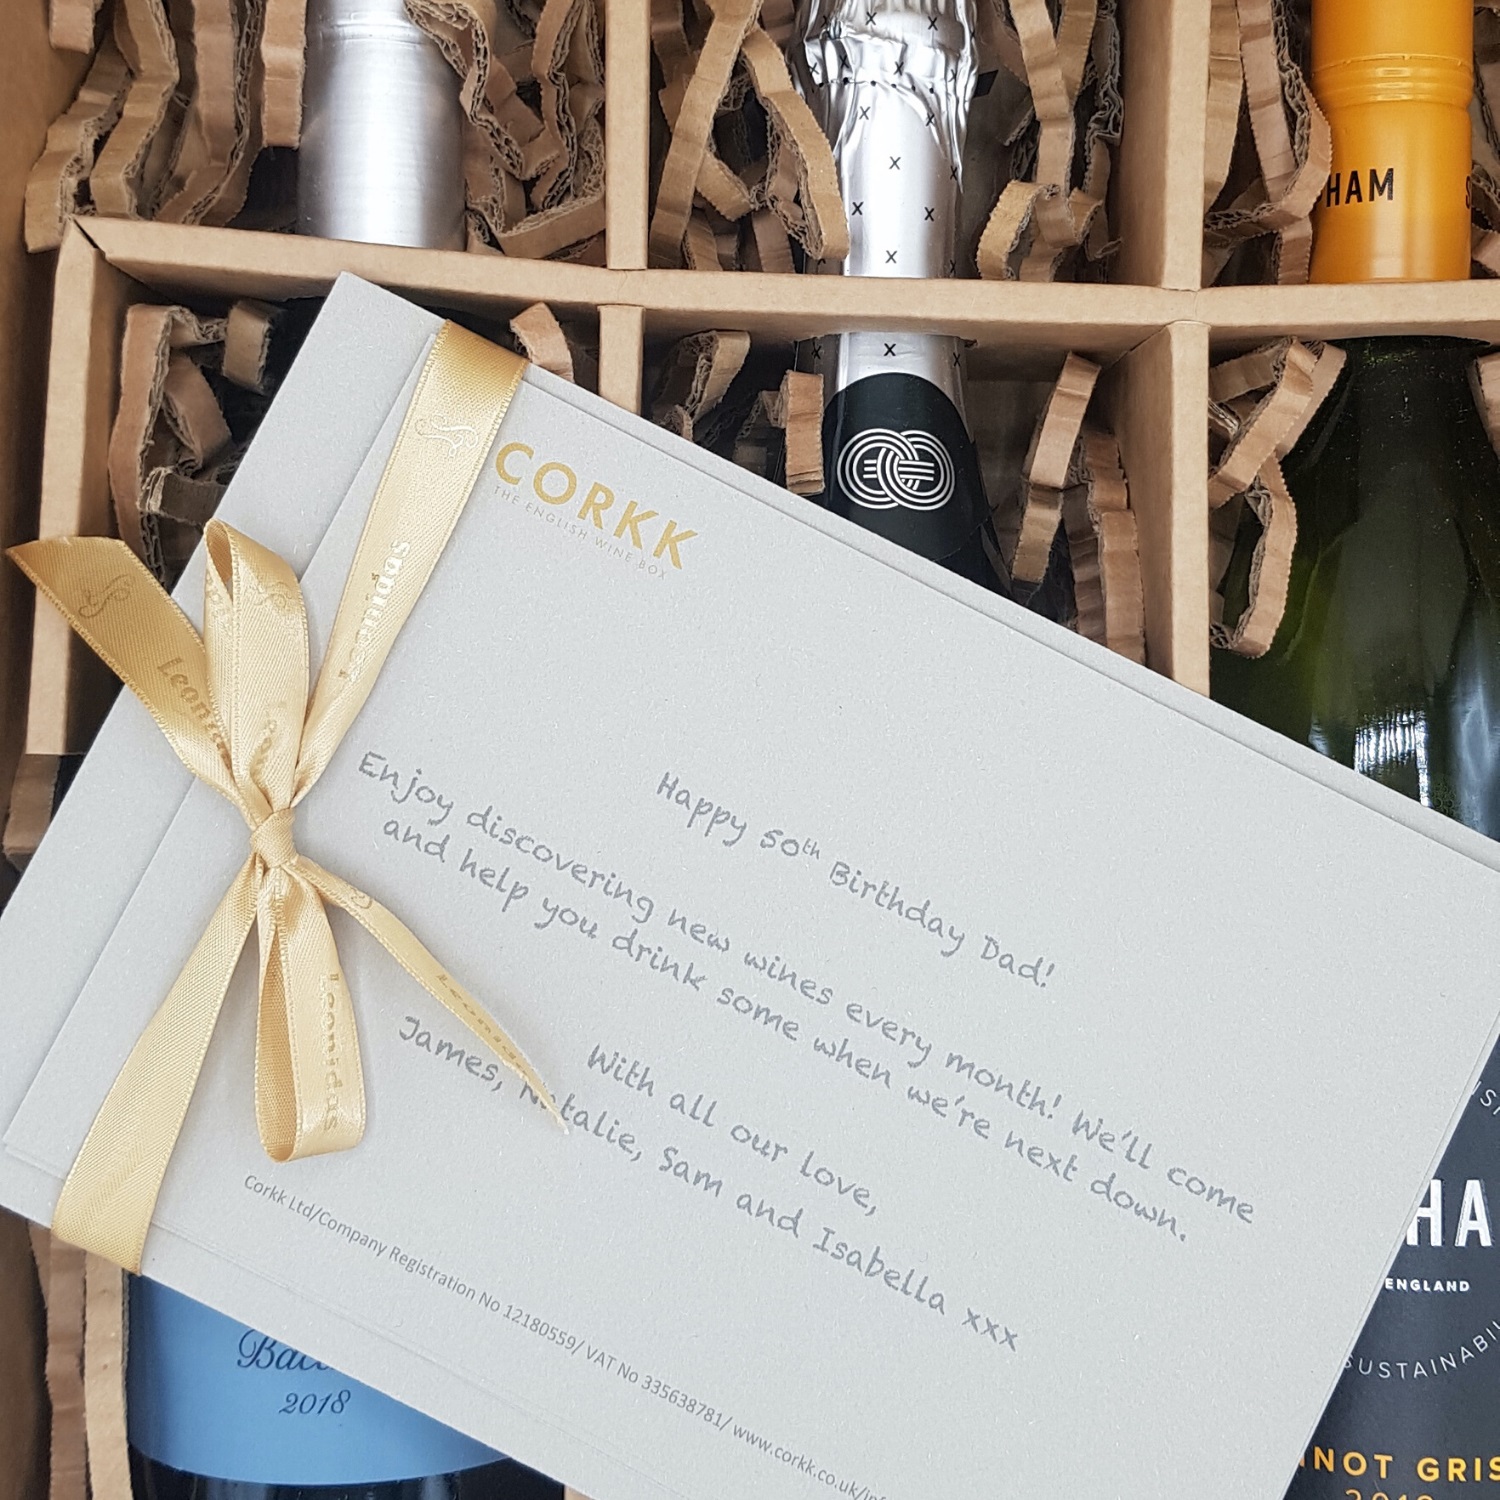 Mixed wine gift case from Corkk, Canterbury, Kent